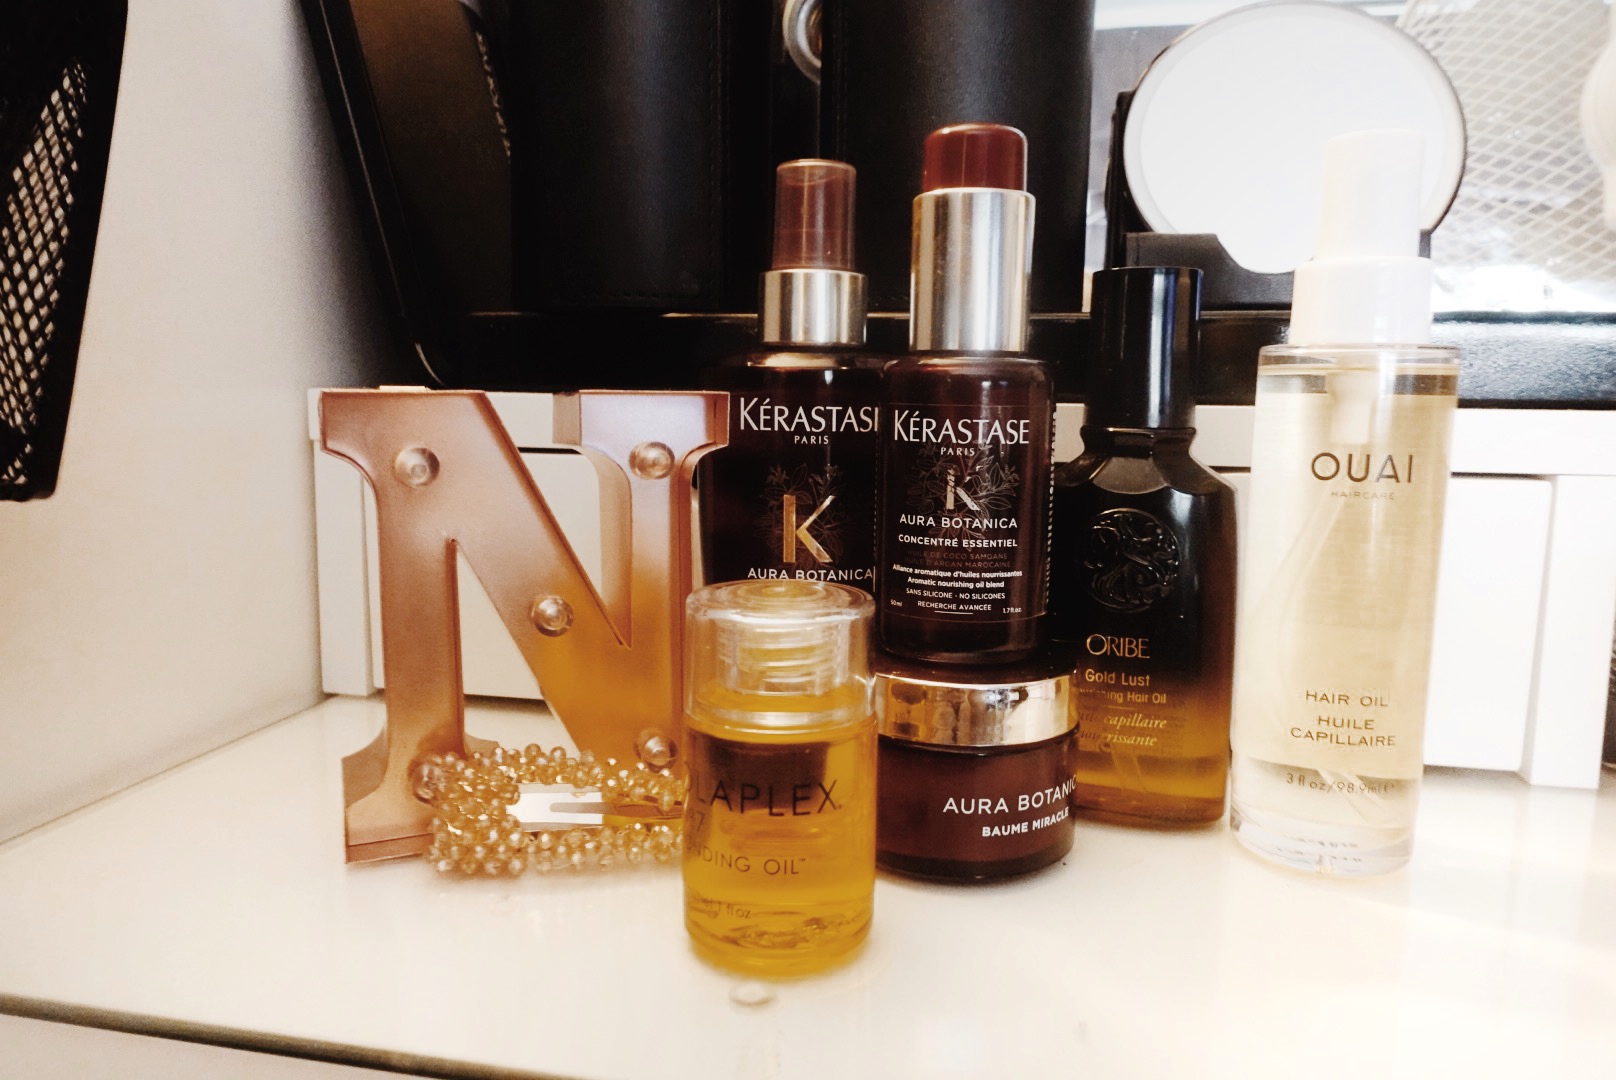 Bottles of various hair oils placed next to each other on the glass counter of a white vanity table. There’s also a rose gold coloured letter N used as decor along with the bottles of hair oil mentioned in the blog post.